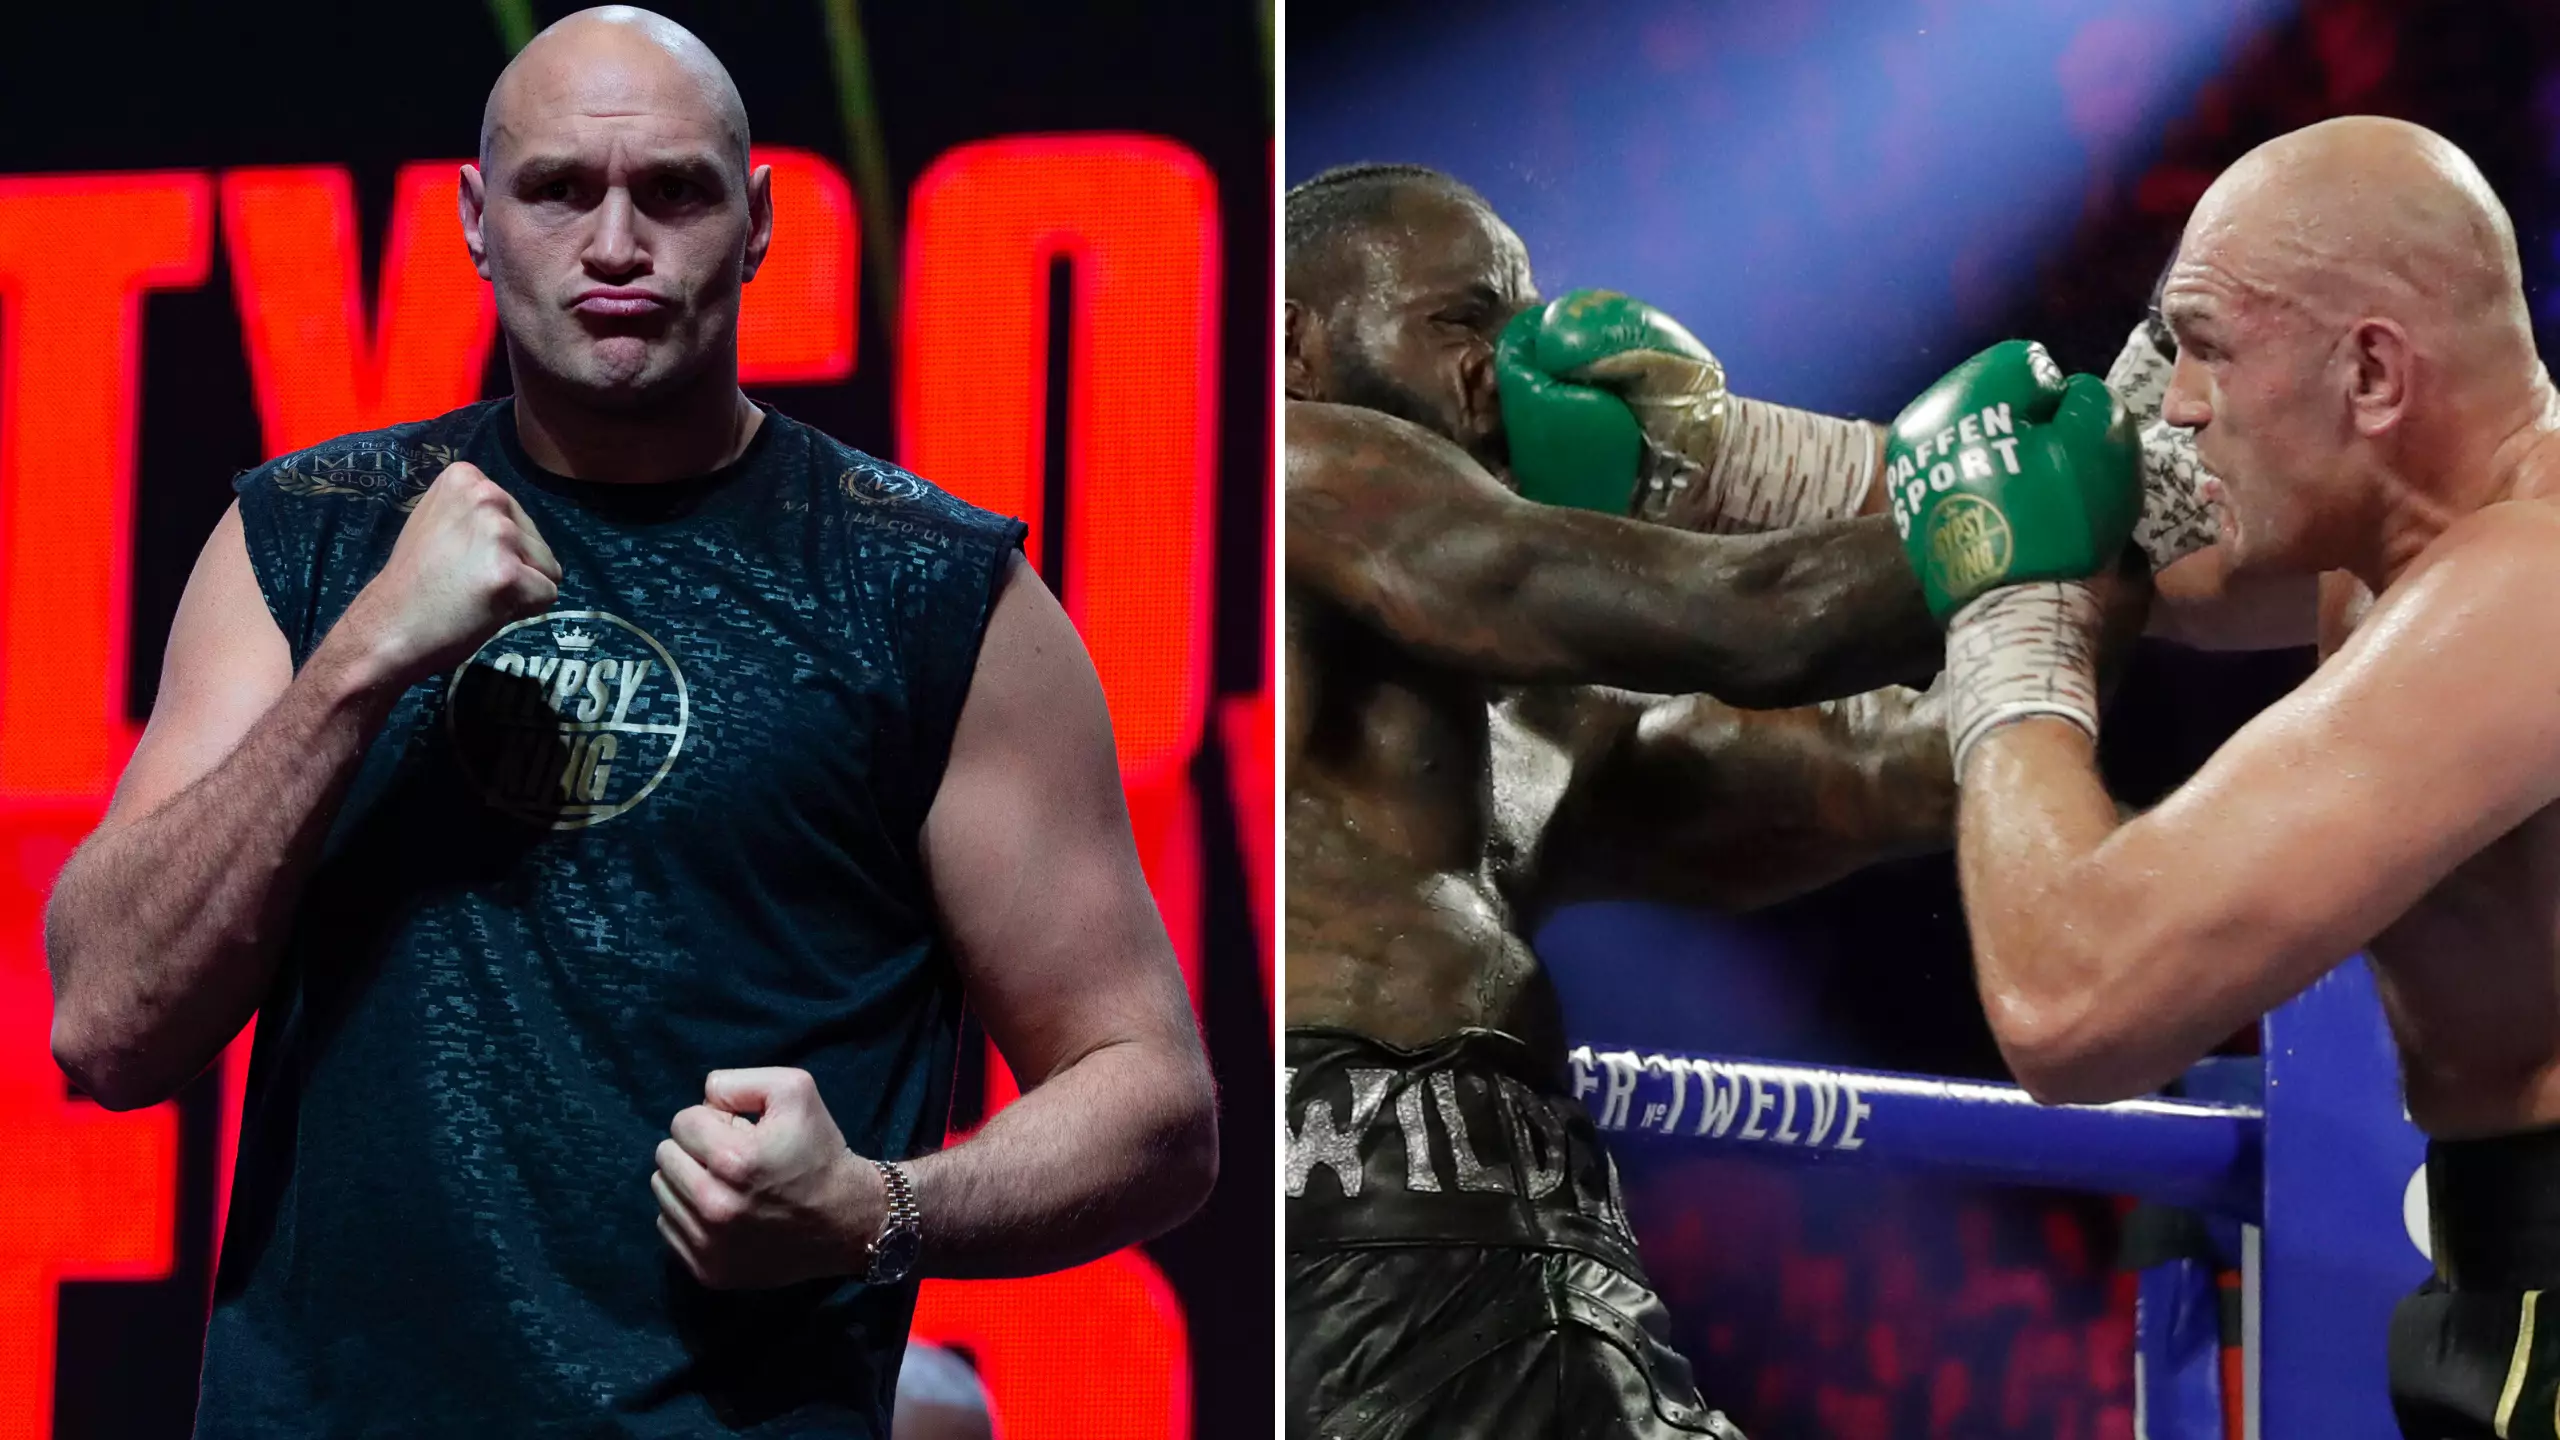 The Brilliant Trick Tyson Fury Used To Look Heavier At Deontay Wilder Weigh-In